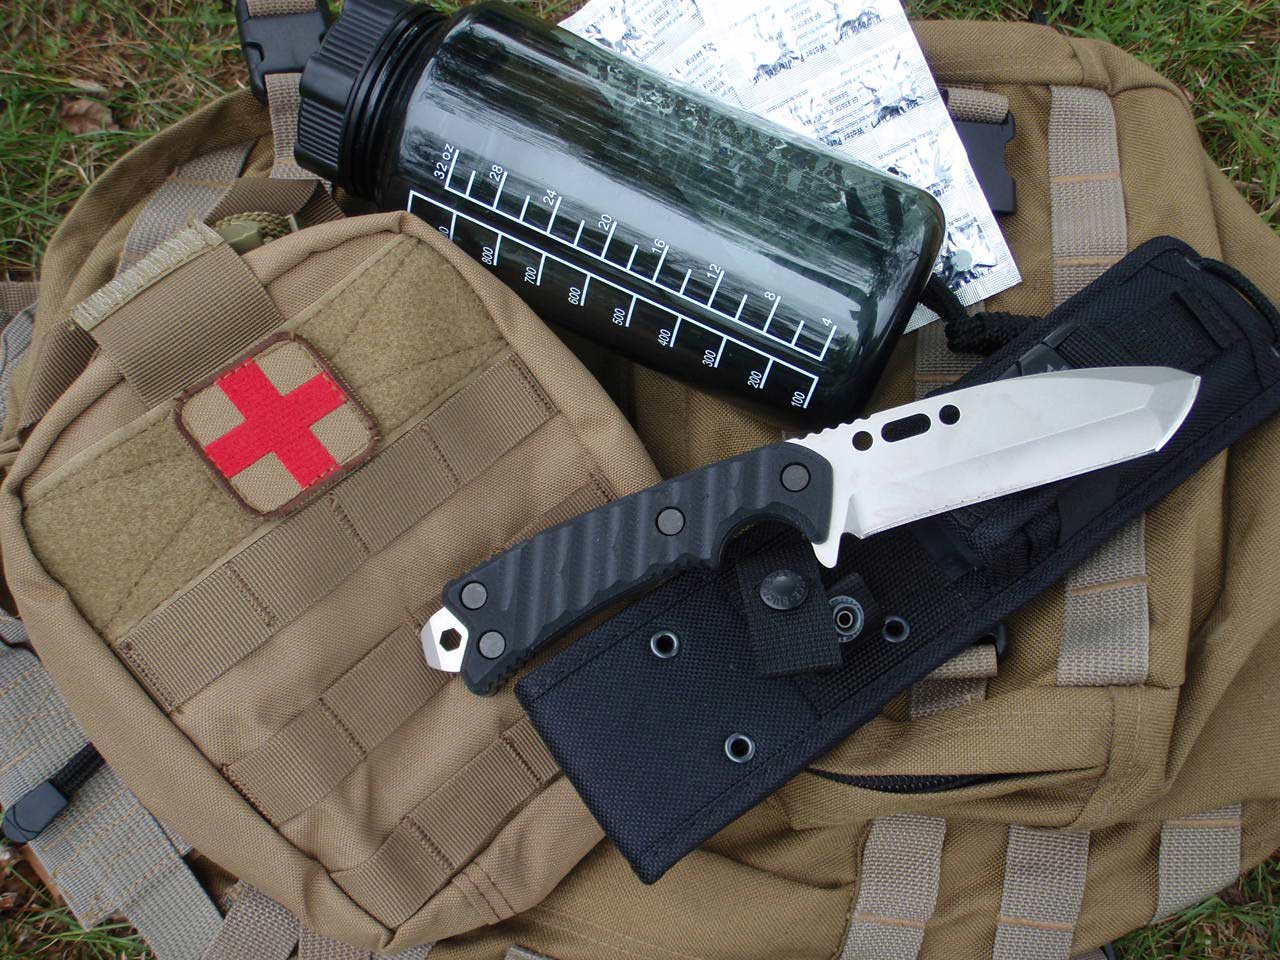 11 Specialized Survival Kits You Can Build to Live Through Any